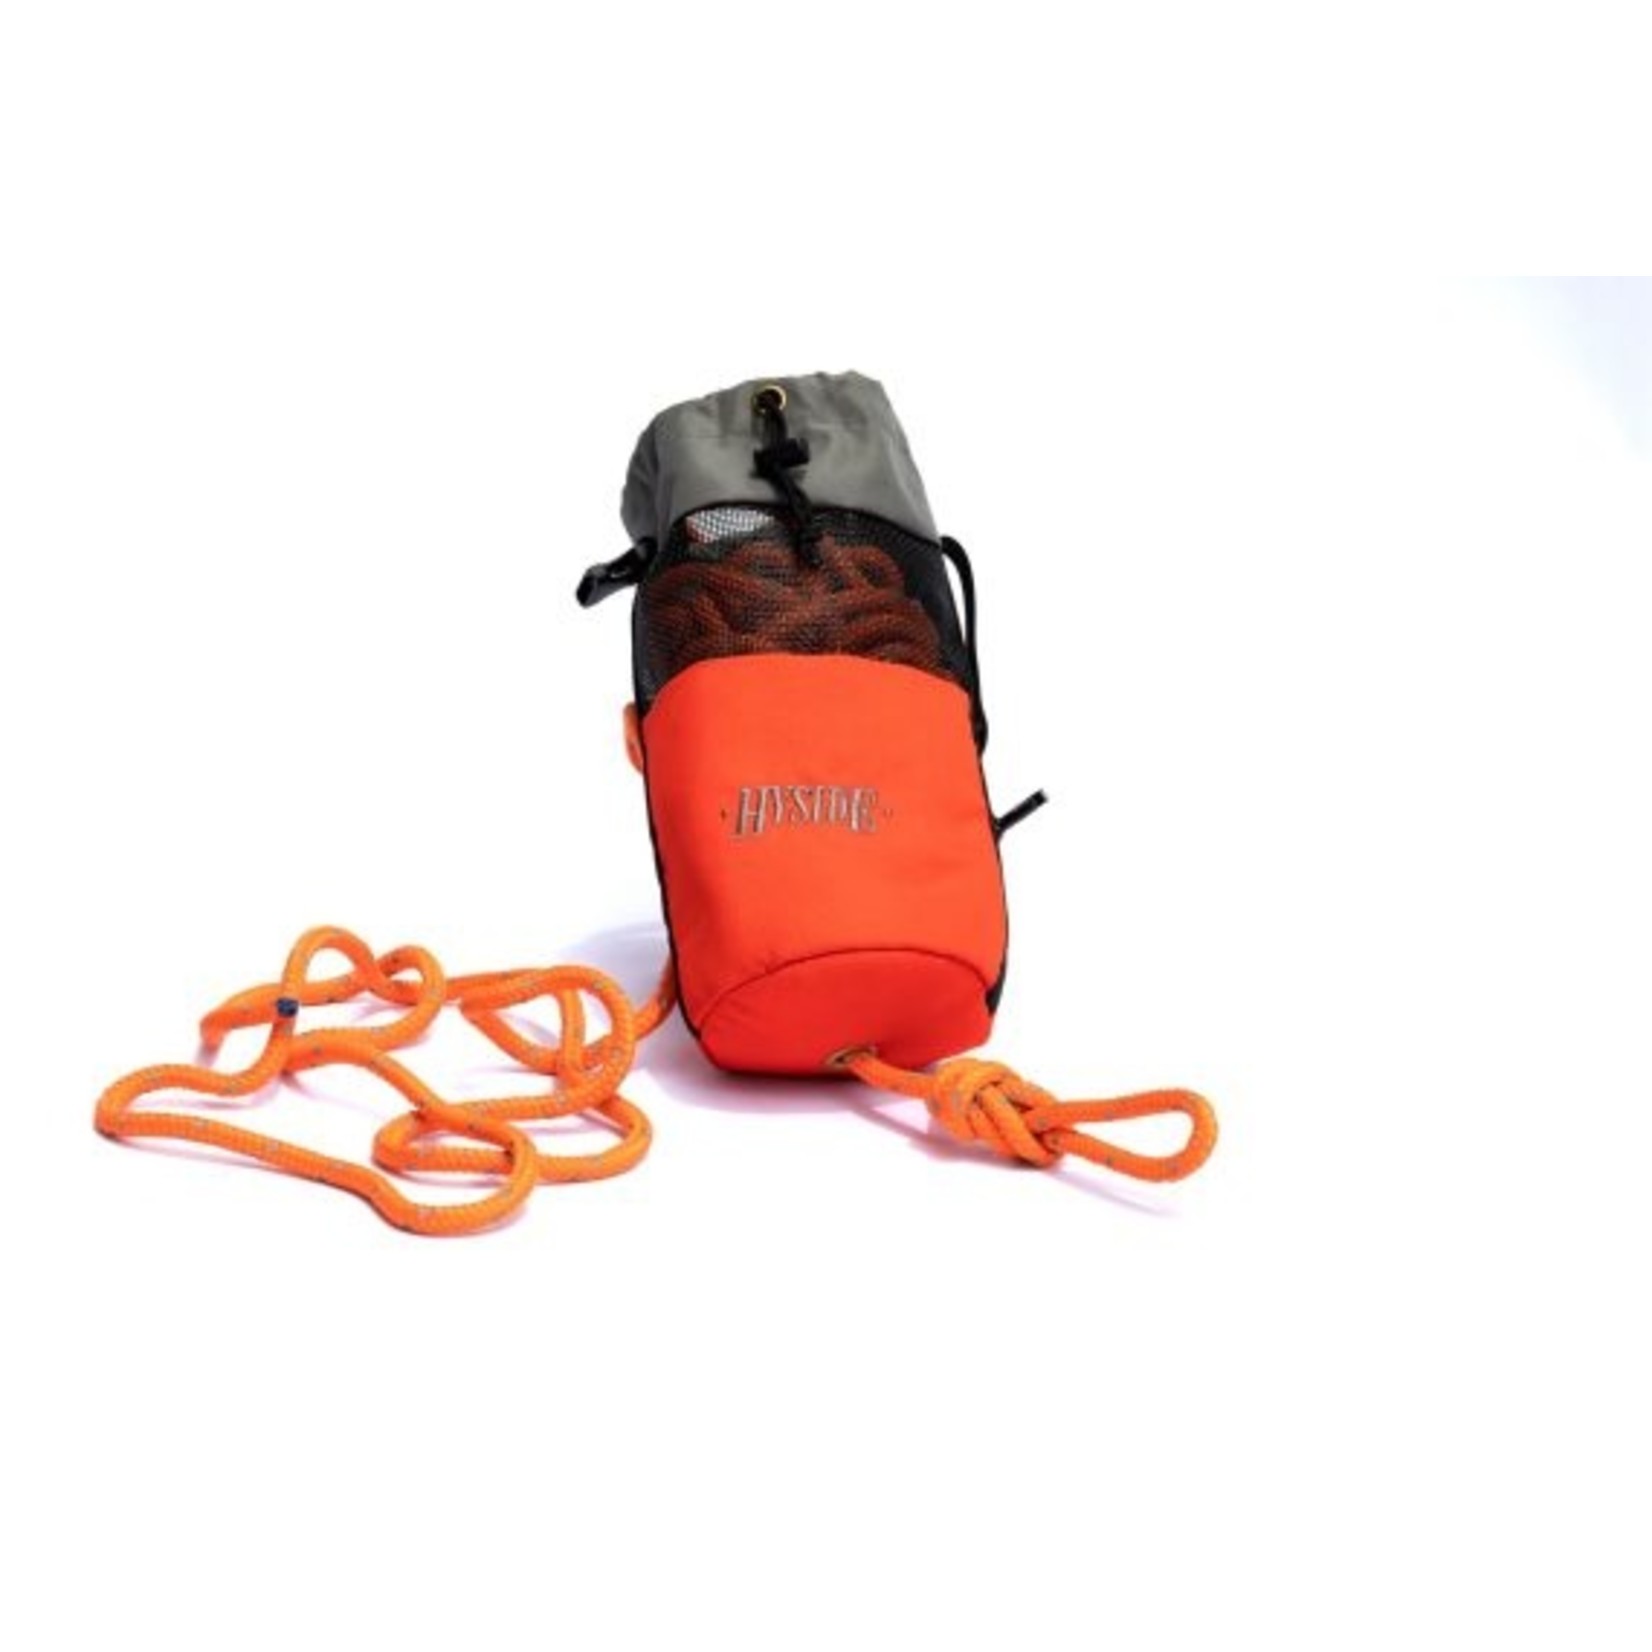 Hyside Inflatables HYSIDE 70′ Throw Bag